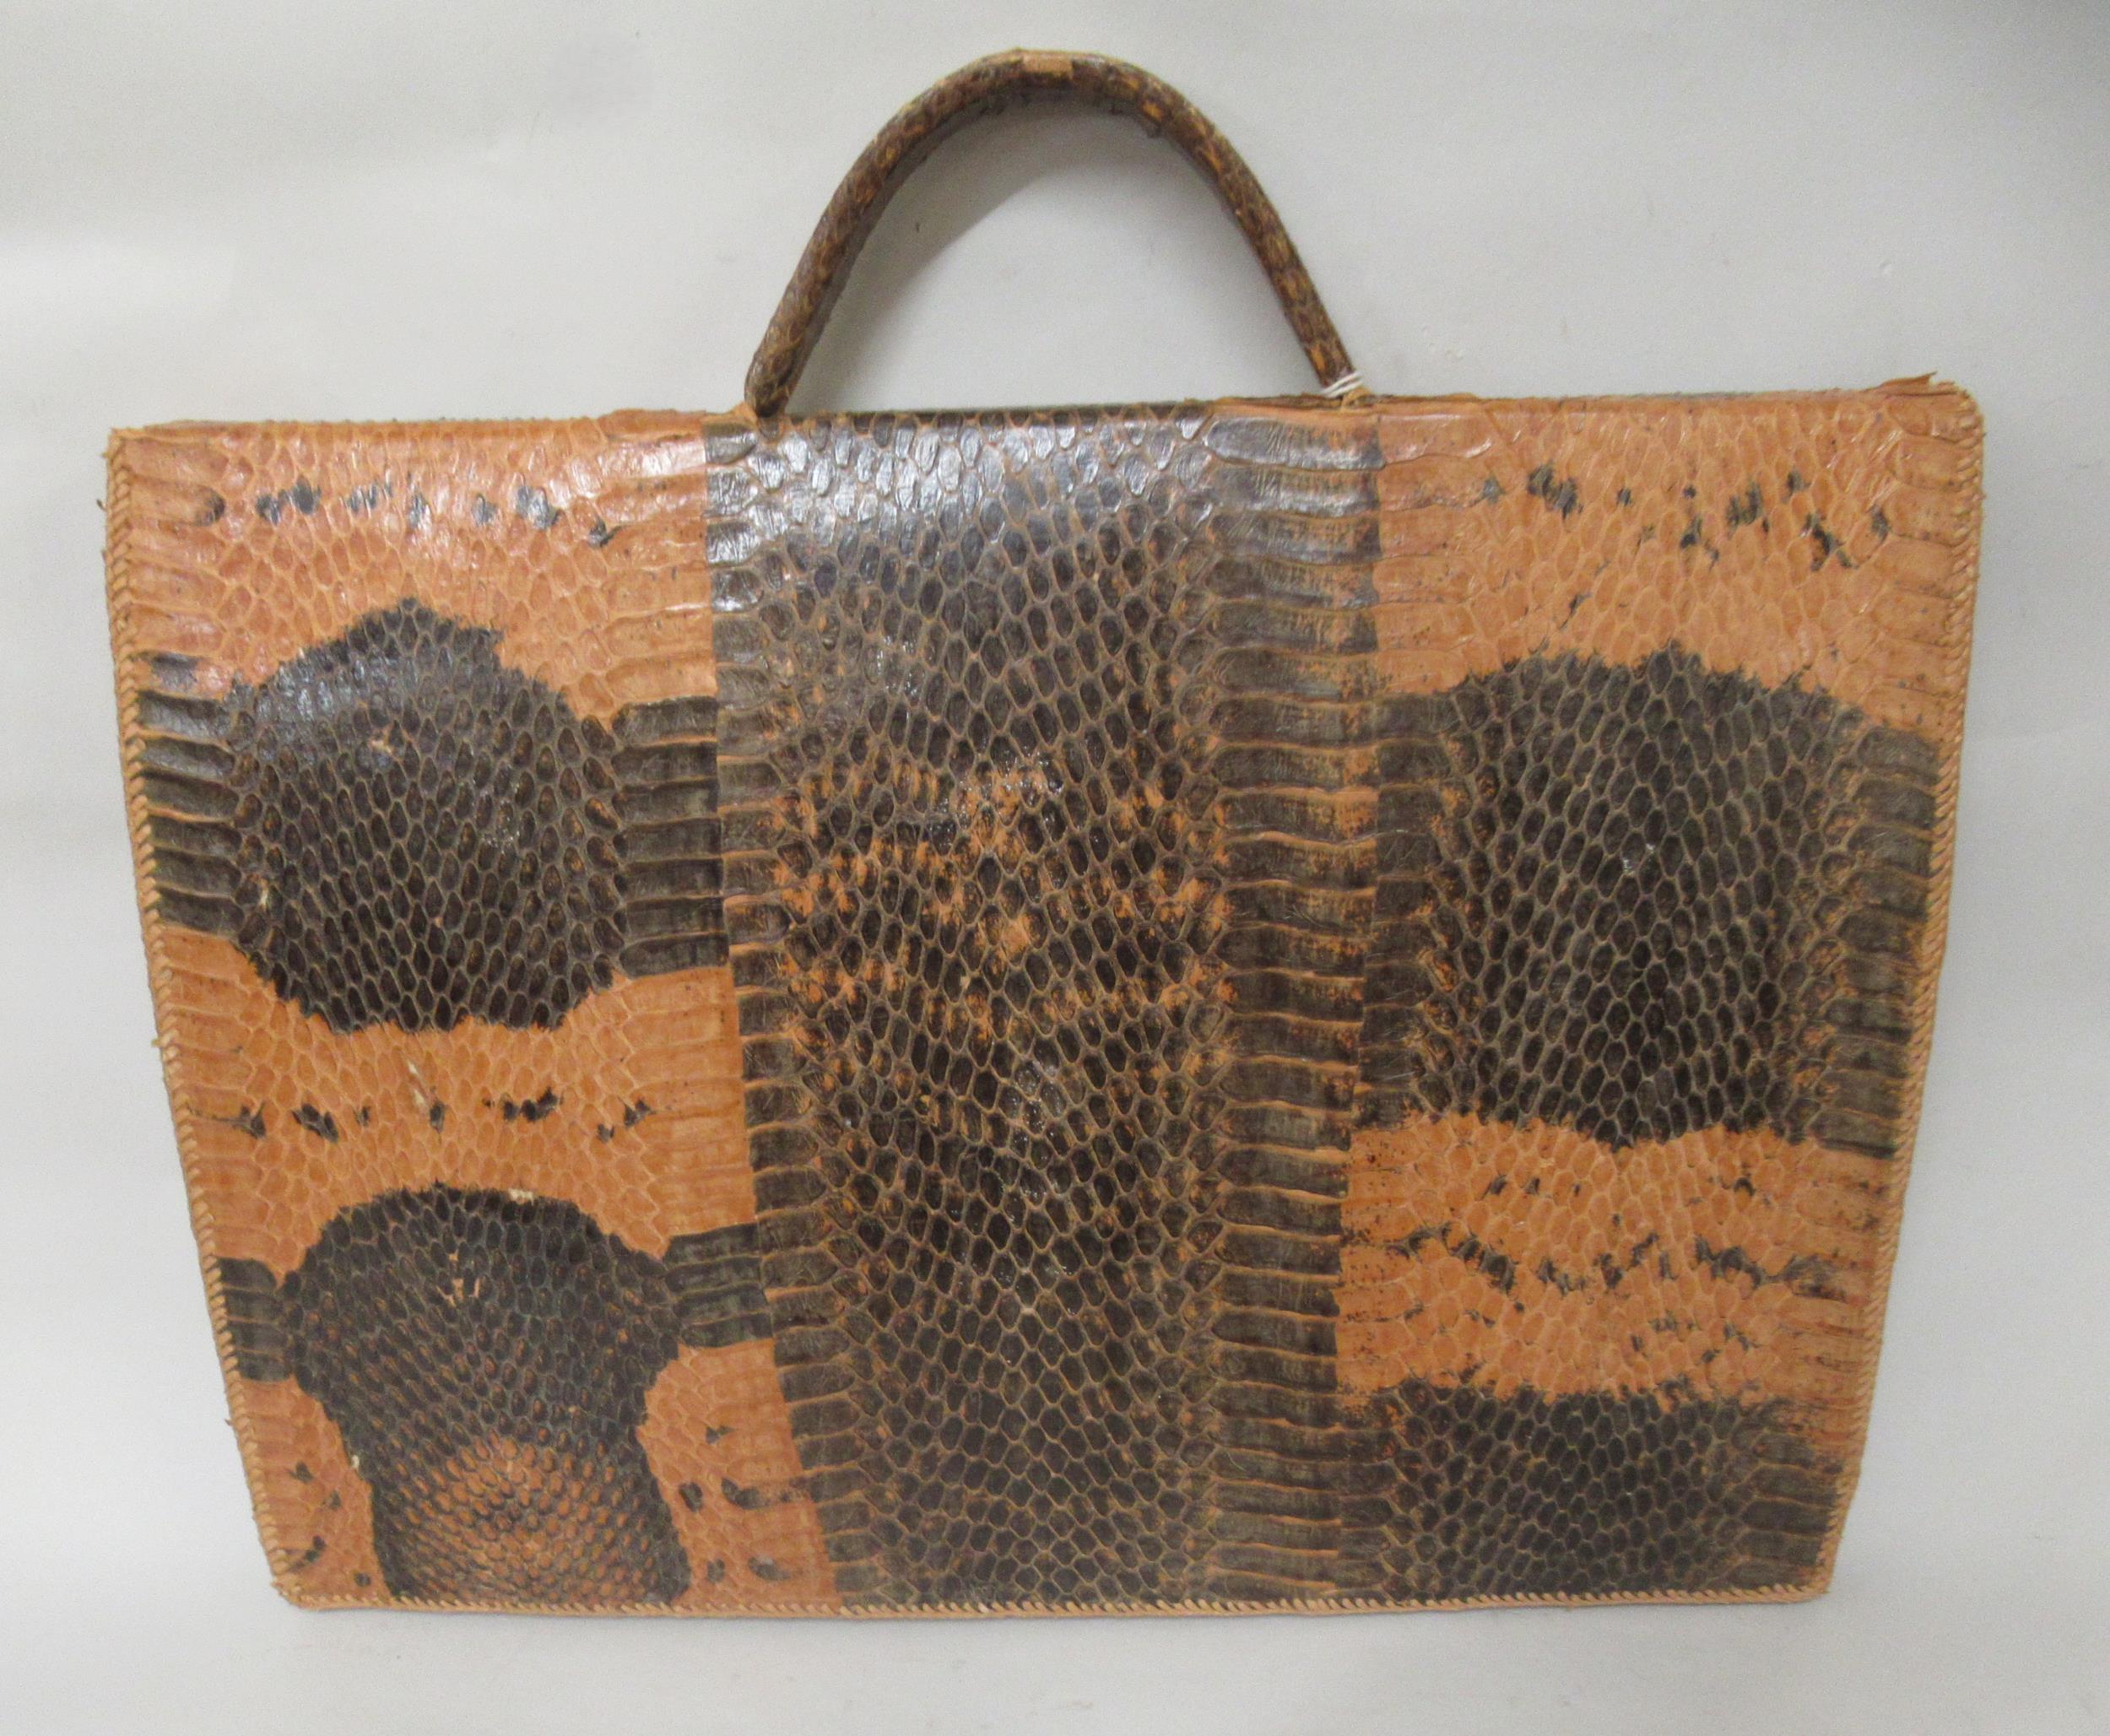 Snakeskin and leather briefcase, 43cm wide - Image 2 of 2